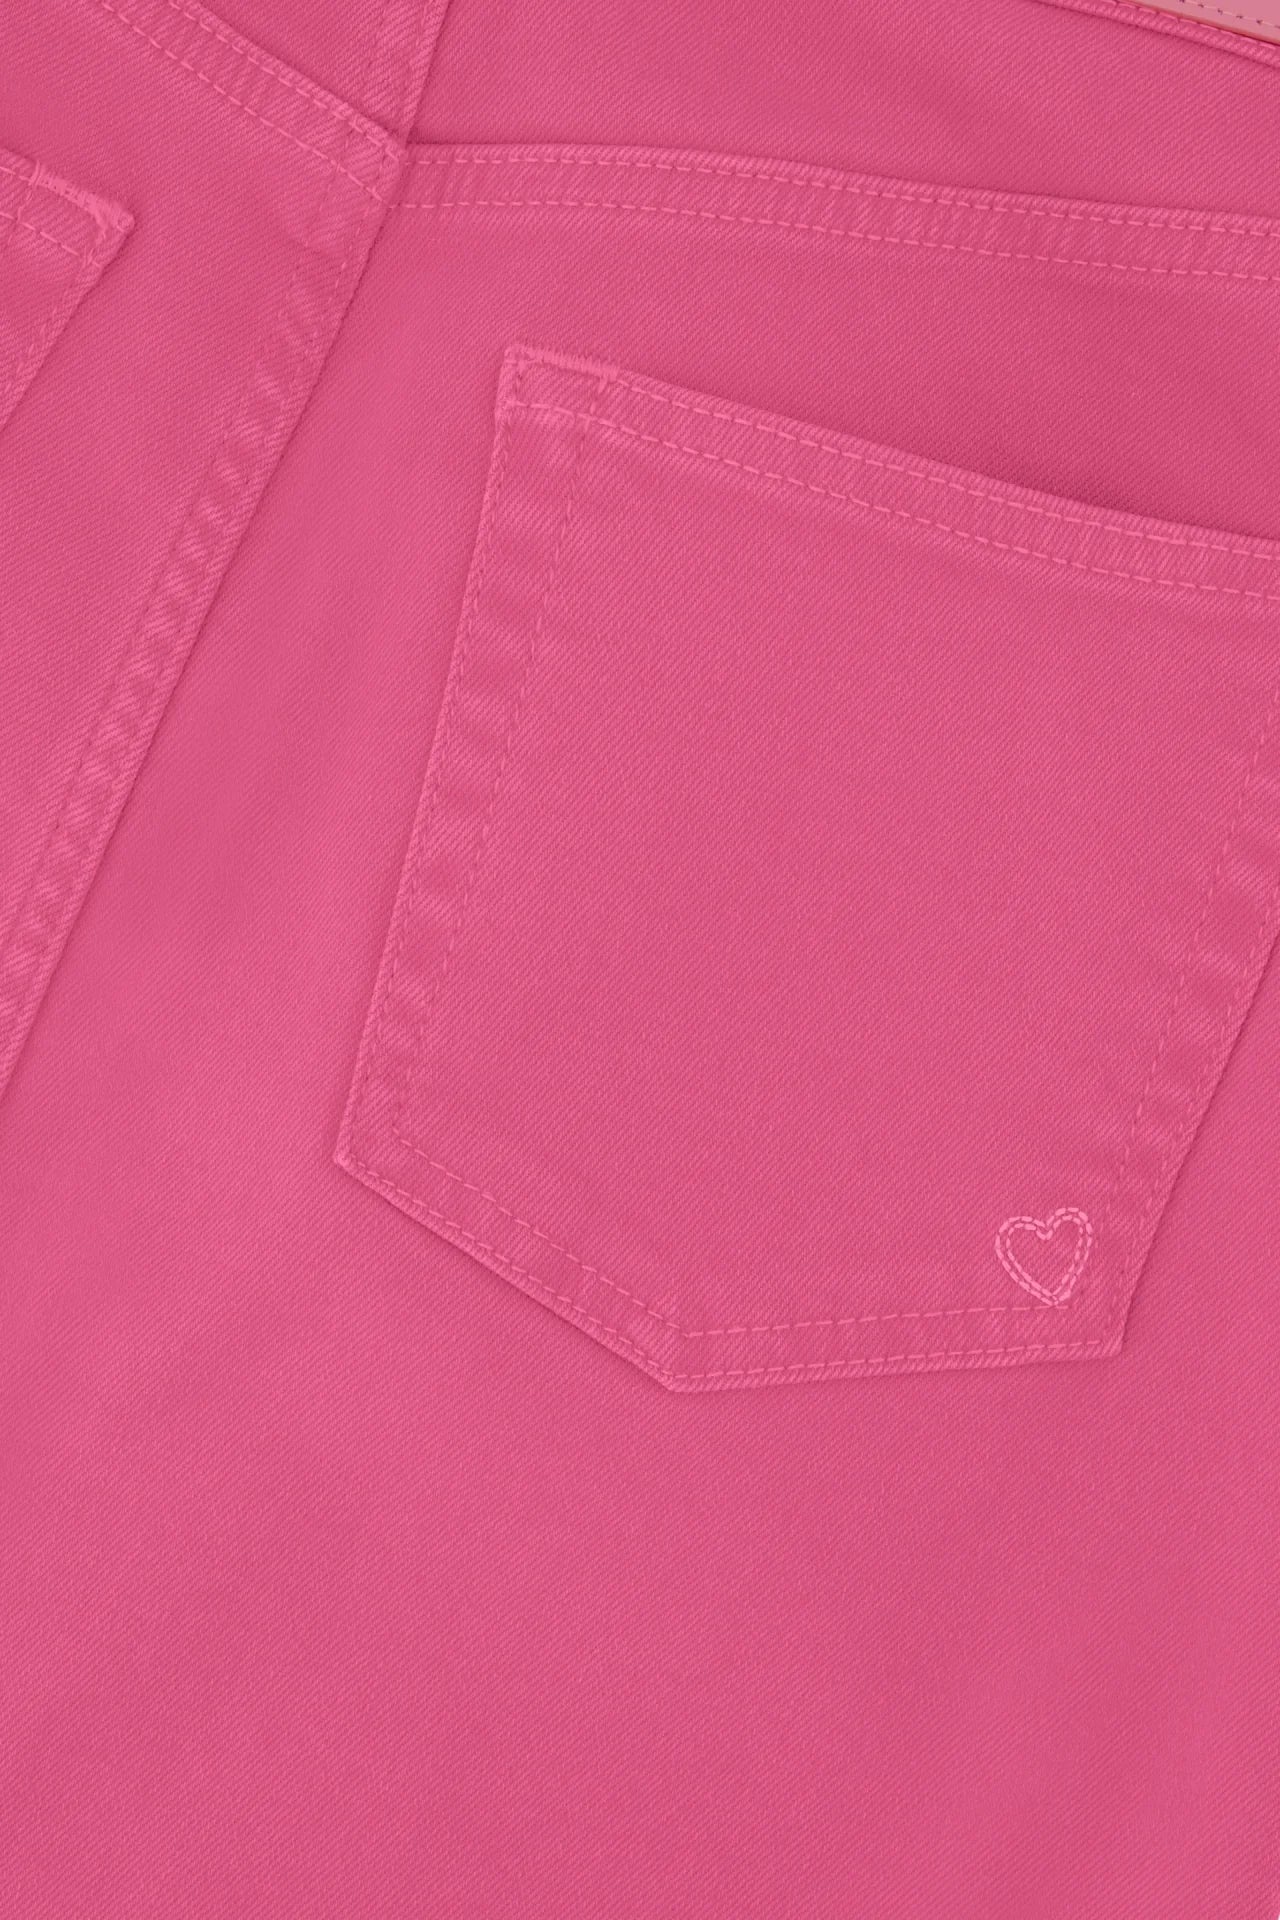 Close-up of a Hot Pink Carlyne Skirt texture with a pocket and a small heart embroidery by Fabienne Chapot.